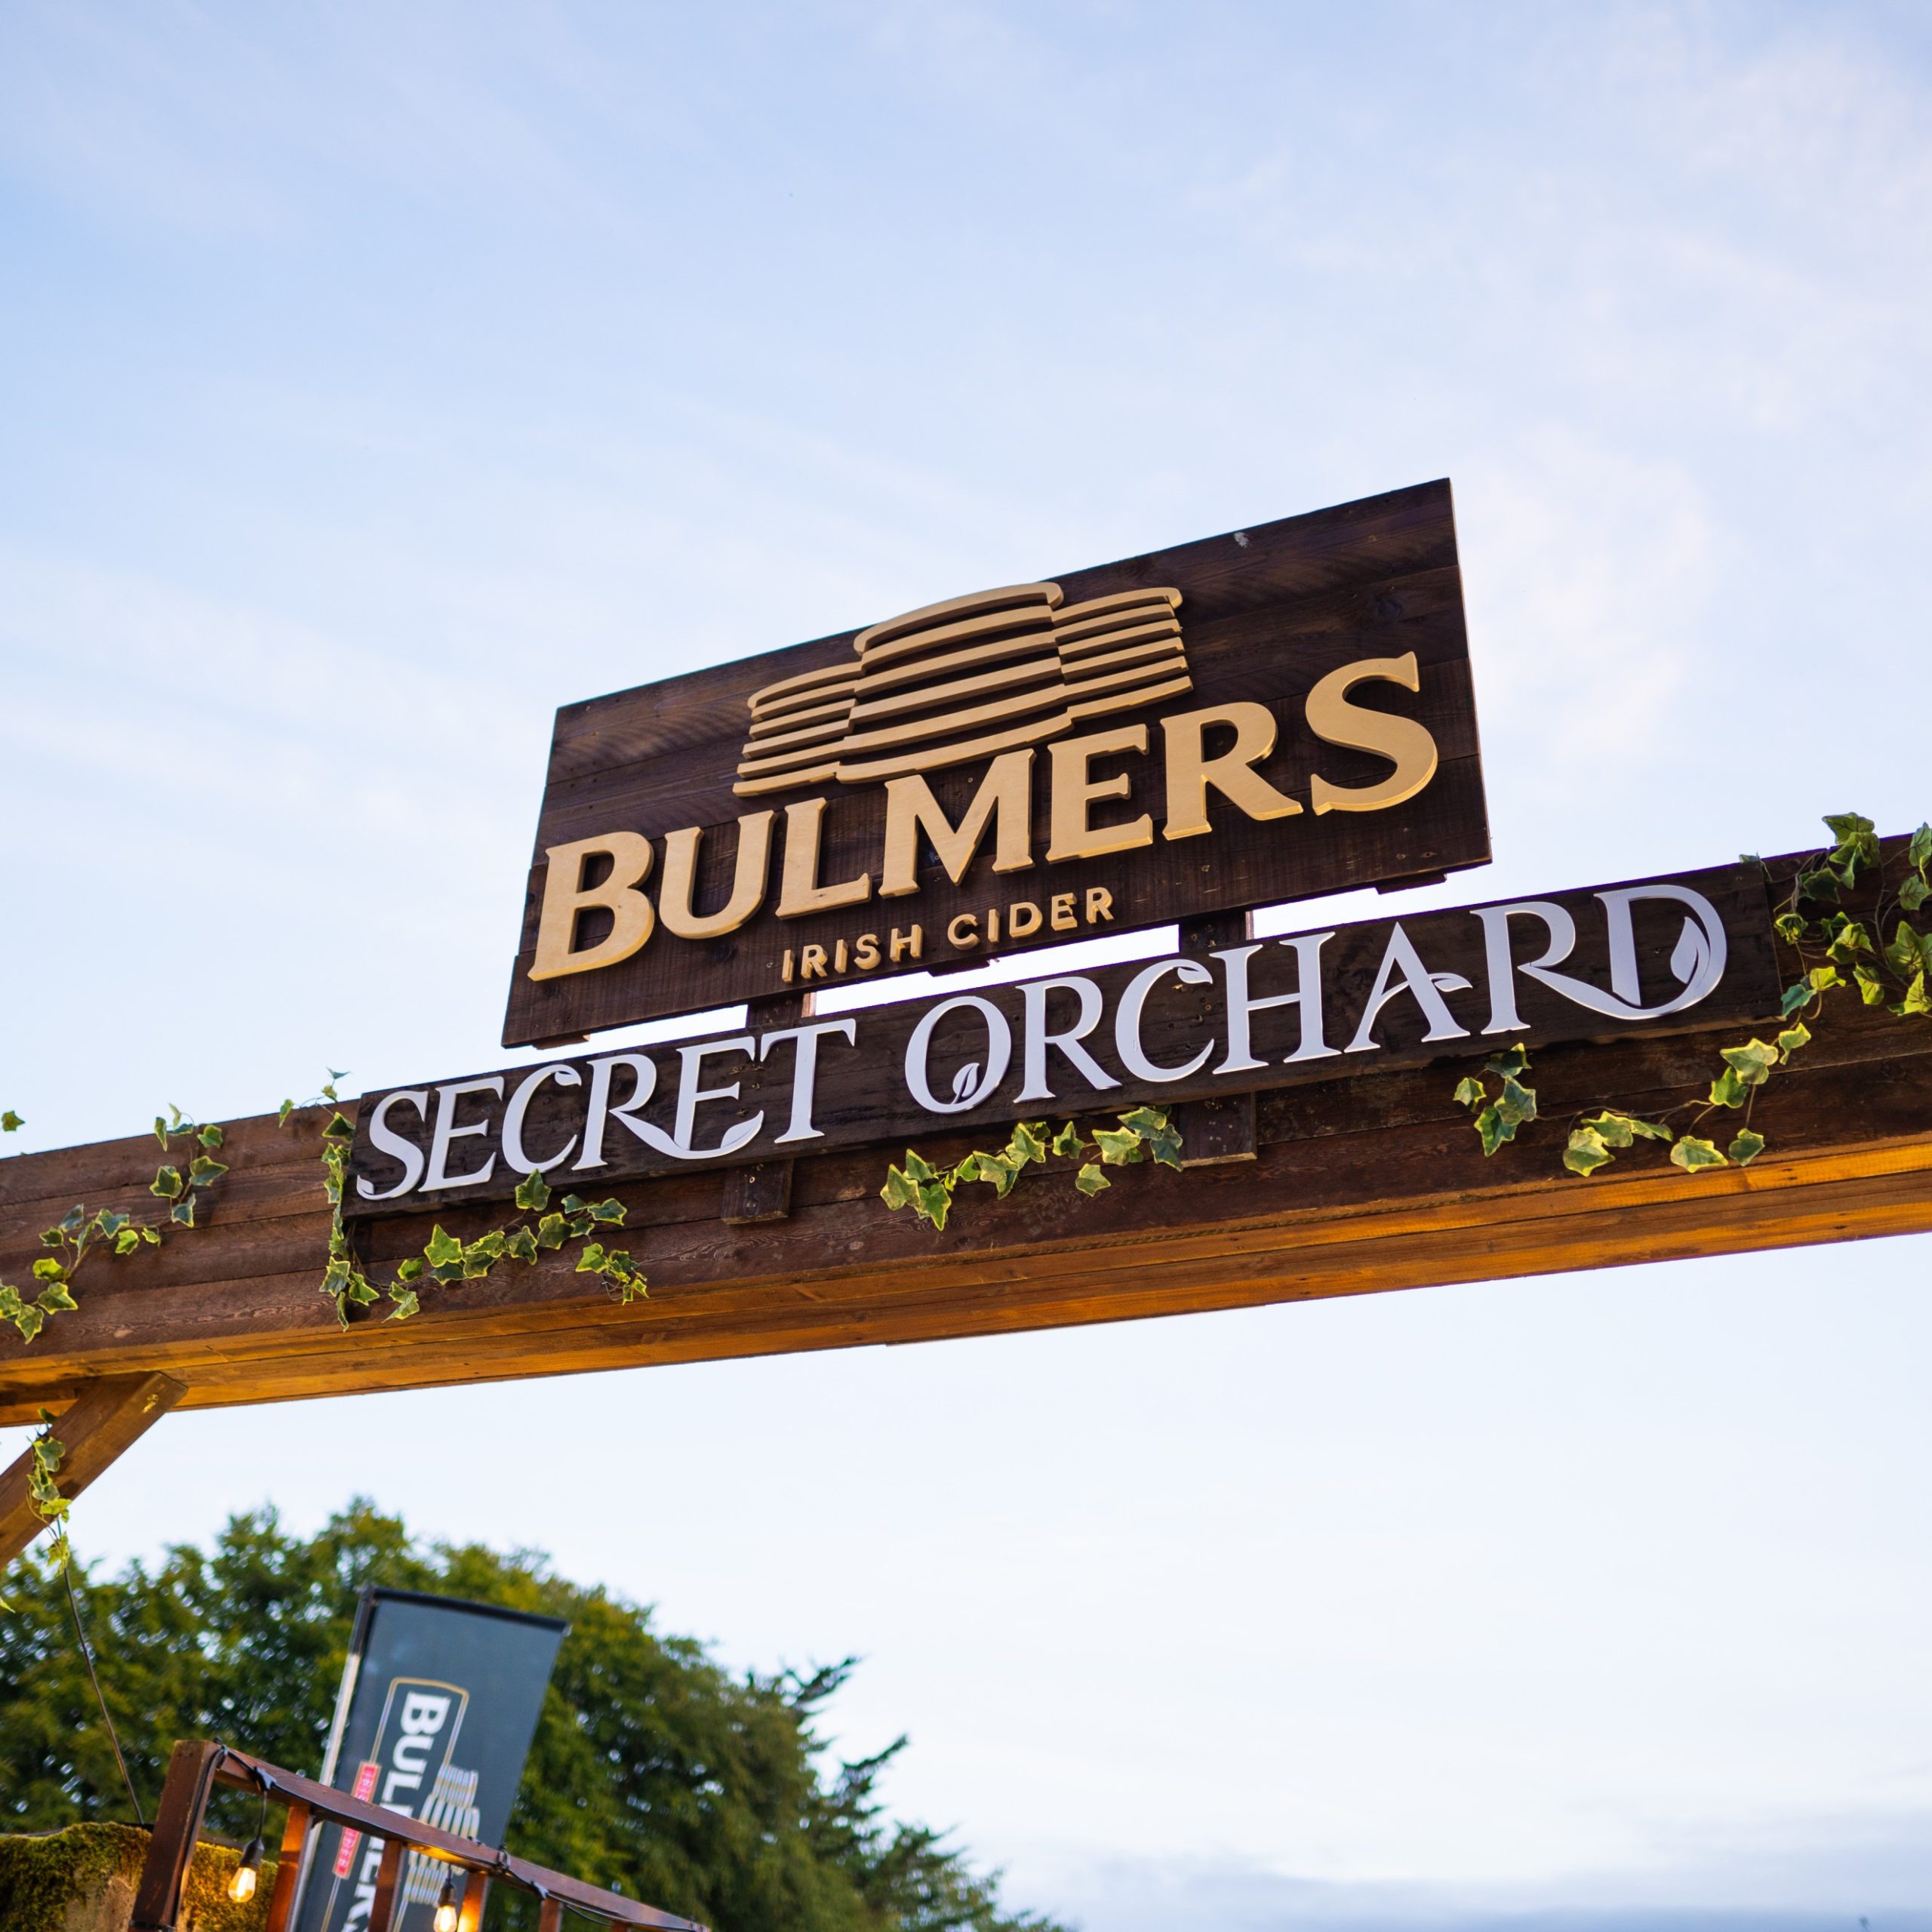 Bulmers Secret Orchard Clonmel 2023 To Take Place on September 9th 